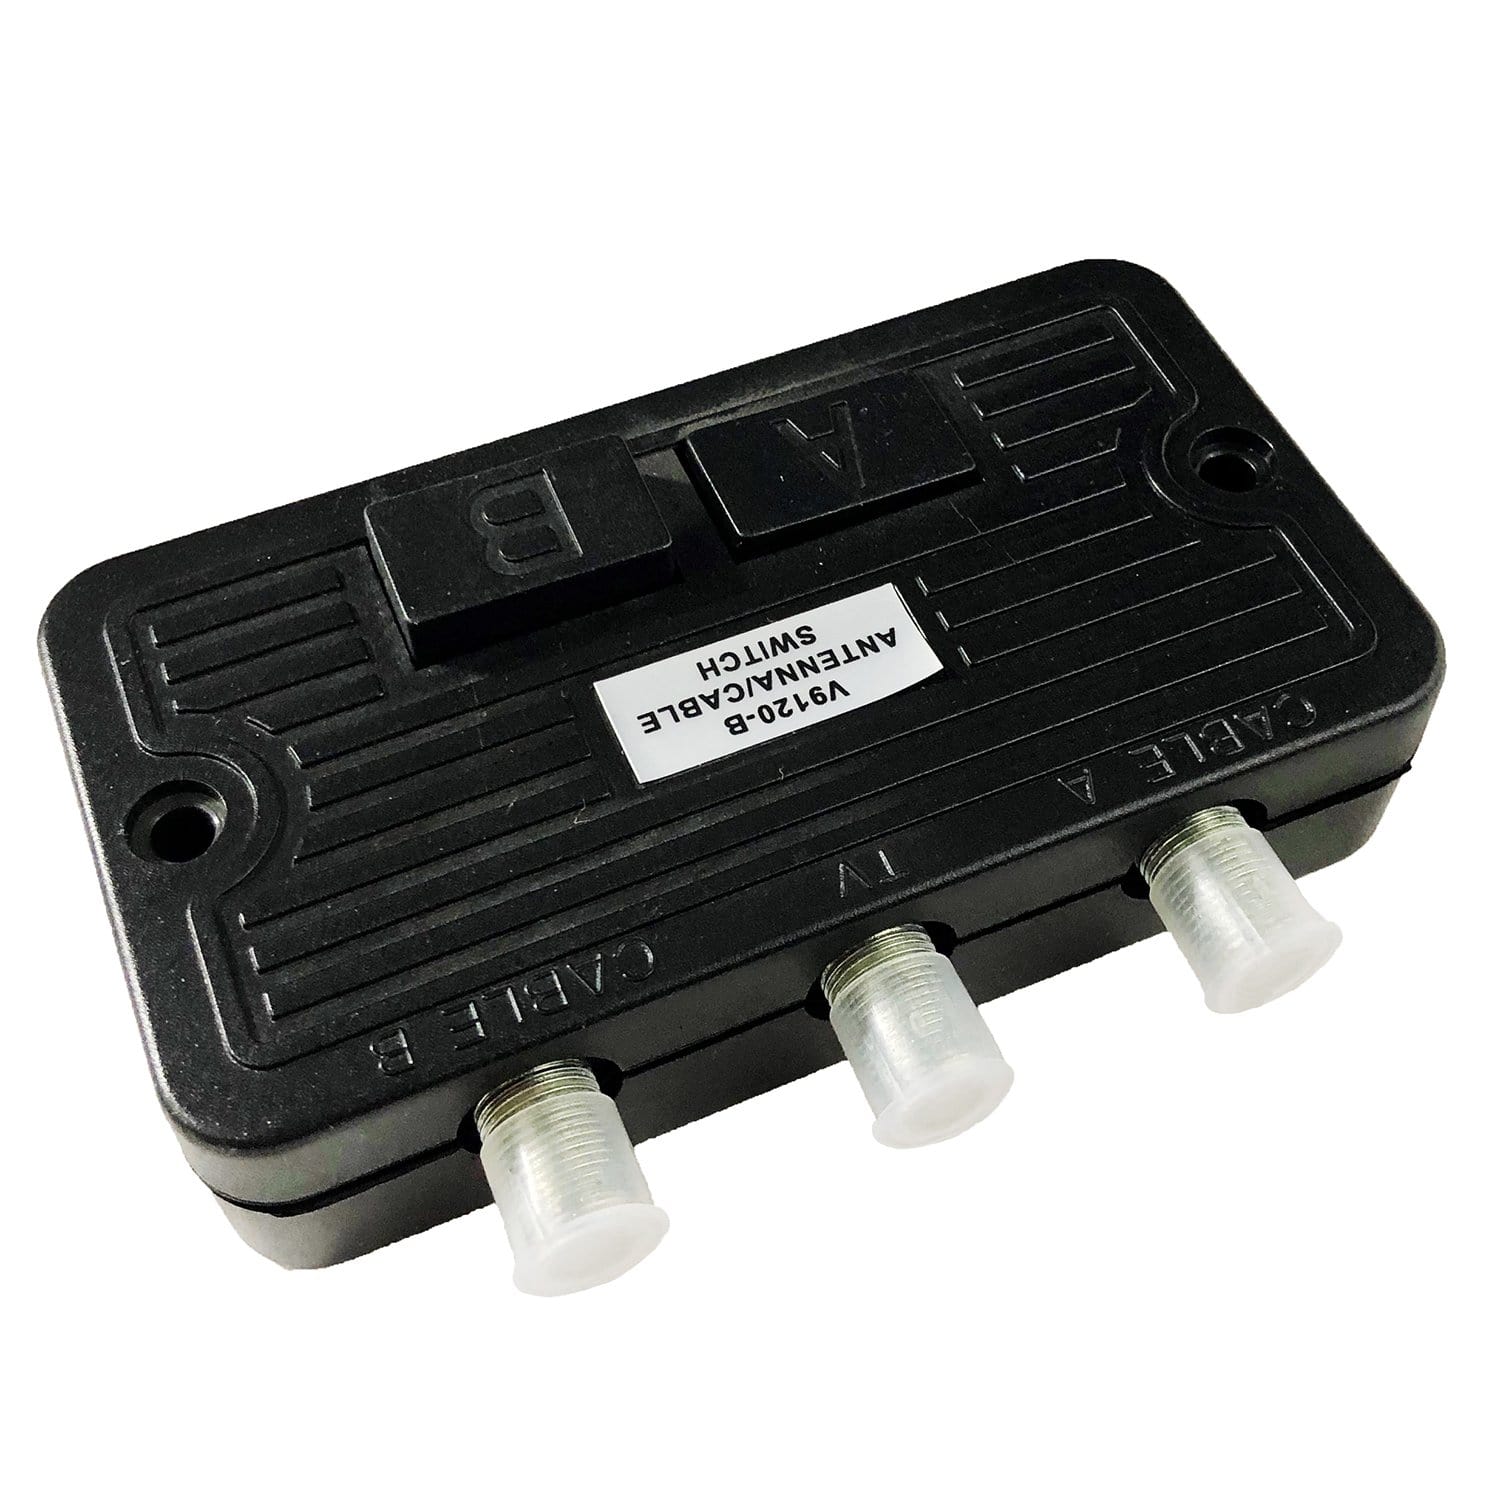 Glomex V9120 A/B Switch For All Tv Antennas